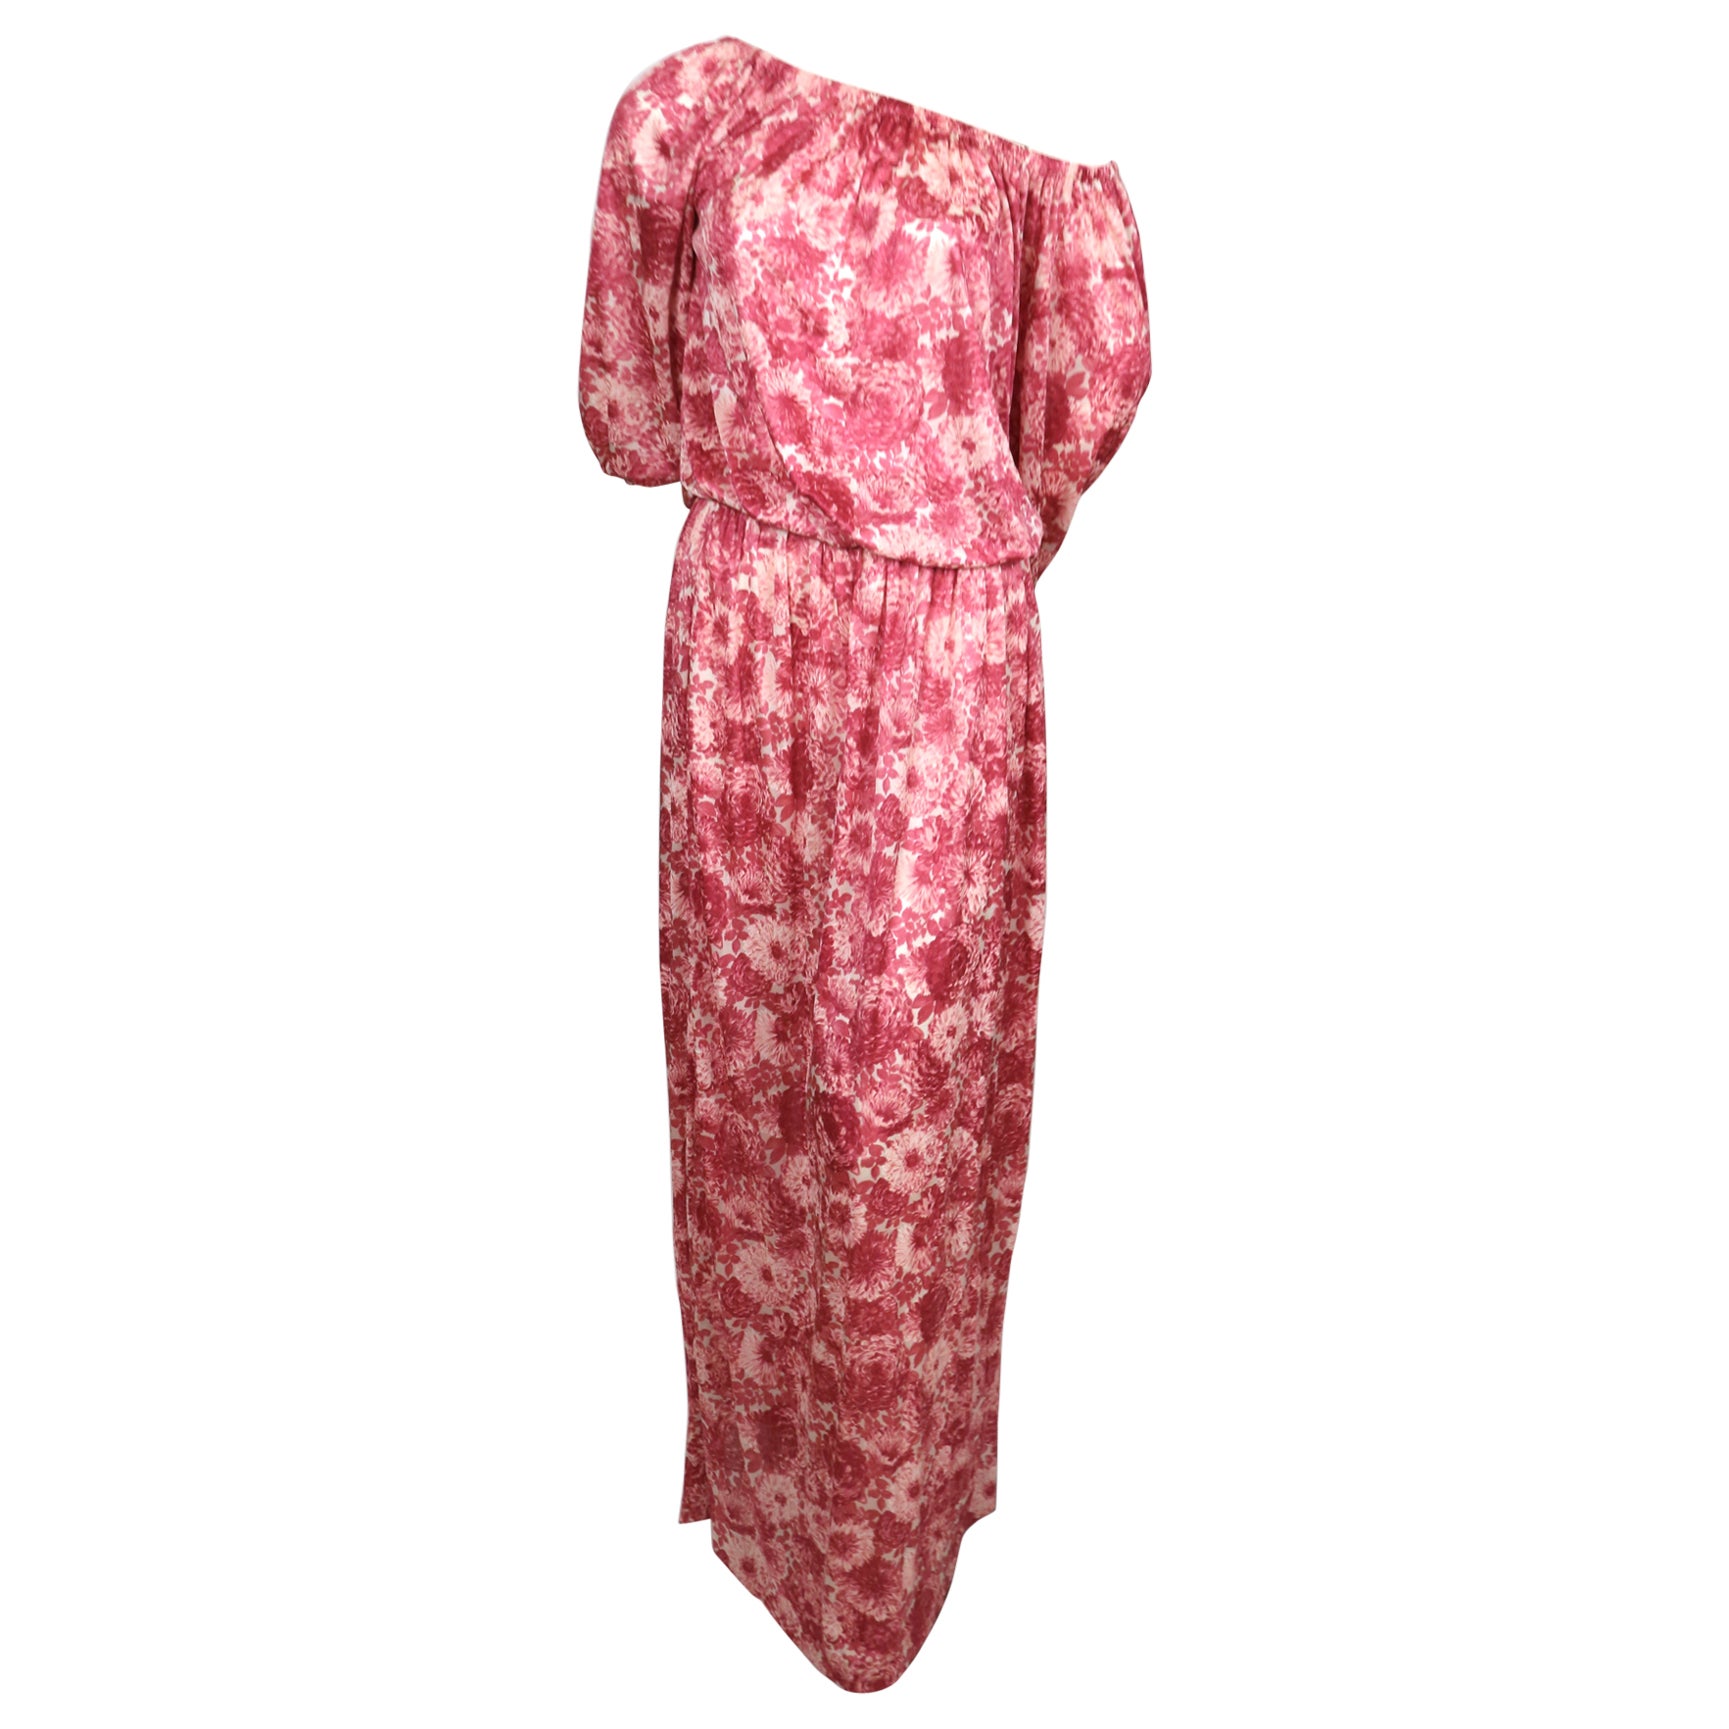 1970's YVES SAINT LAURENT floral printed silk jersey dress For Sale